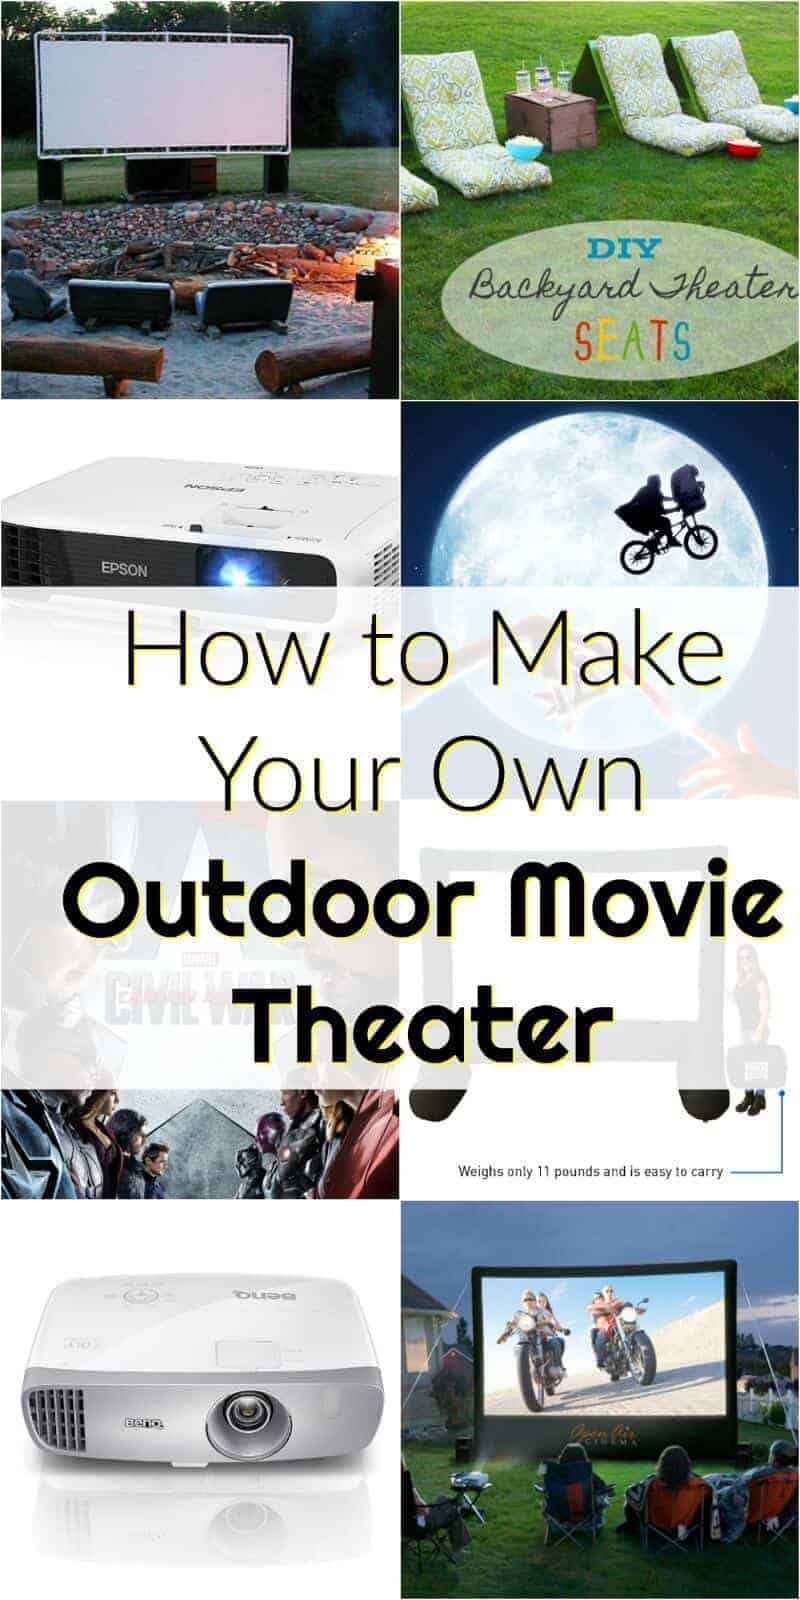 A collage image on how to make your own backyard movie theater